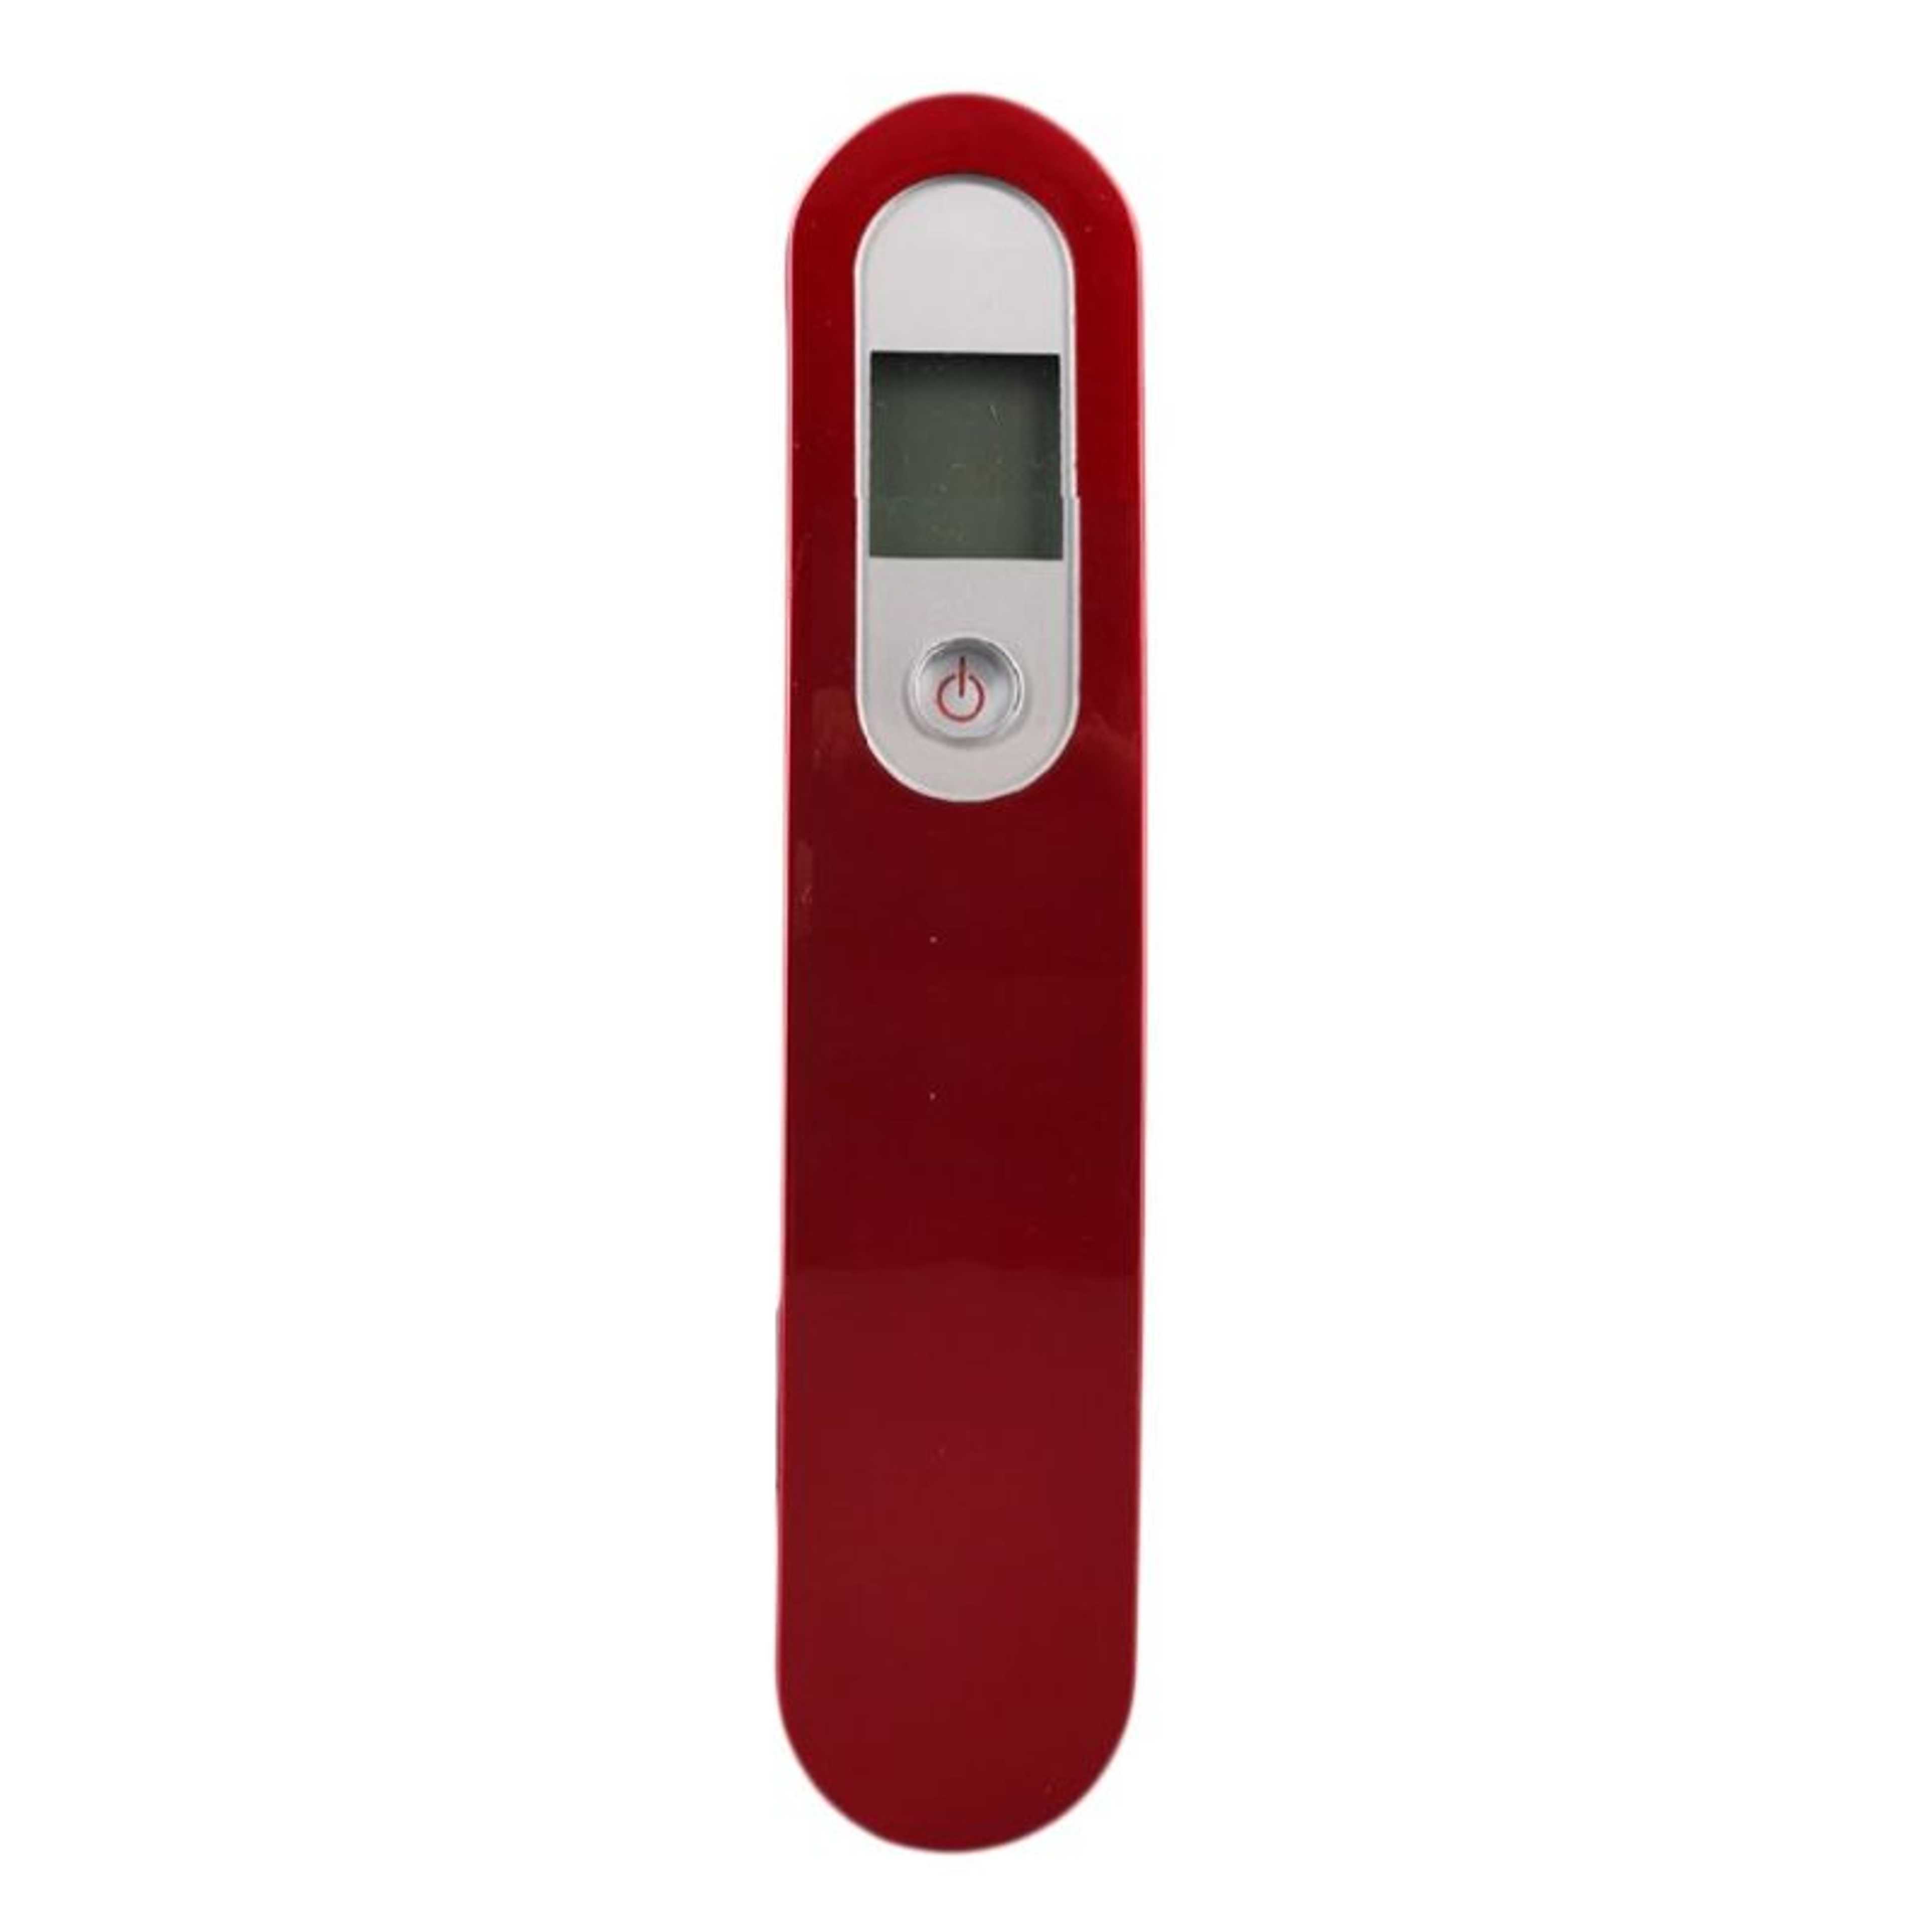 Portable LCD Digital Display Kitchen Weighting Scale Handheld Luggage Scale - Random Color & Design